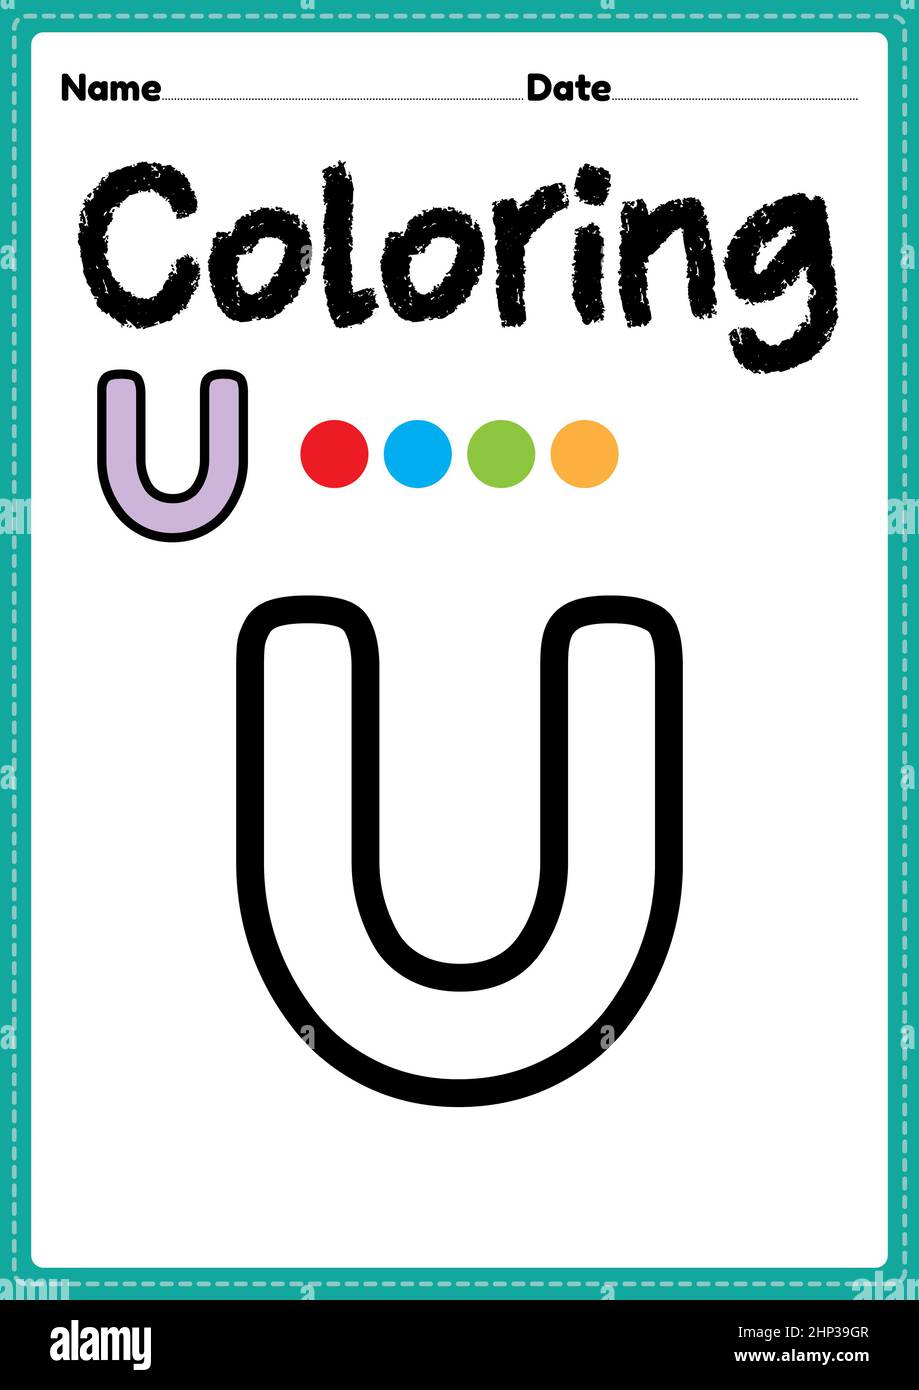 Letter u alphabet coloring page for preschool kindergarten montessori kids to learn and practice writing drawing and coloring activities to develo stock photo